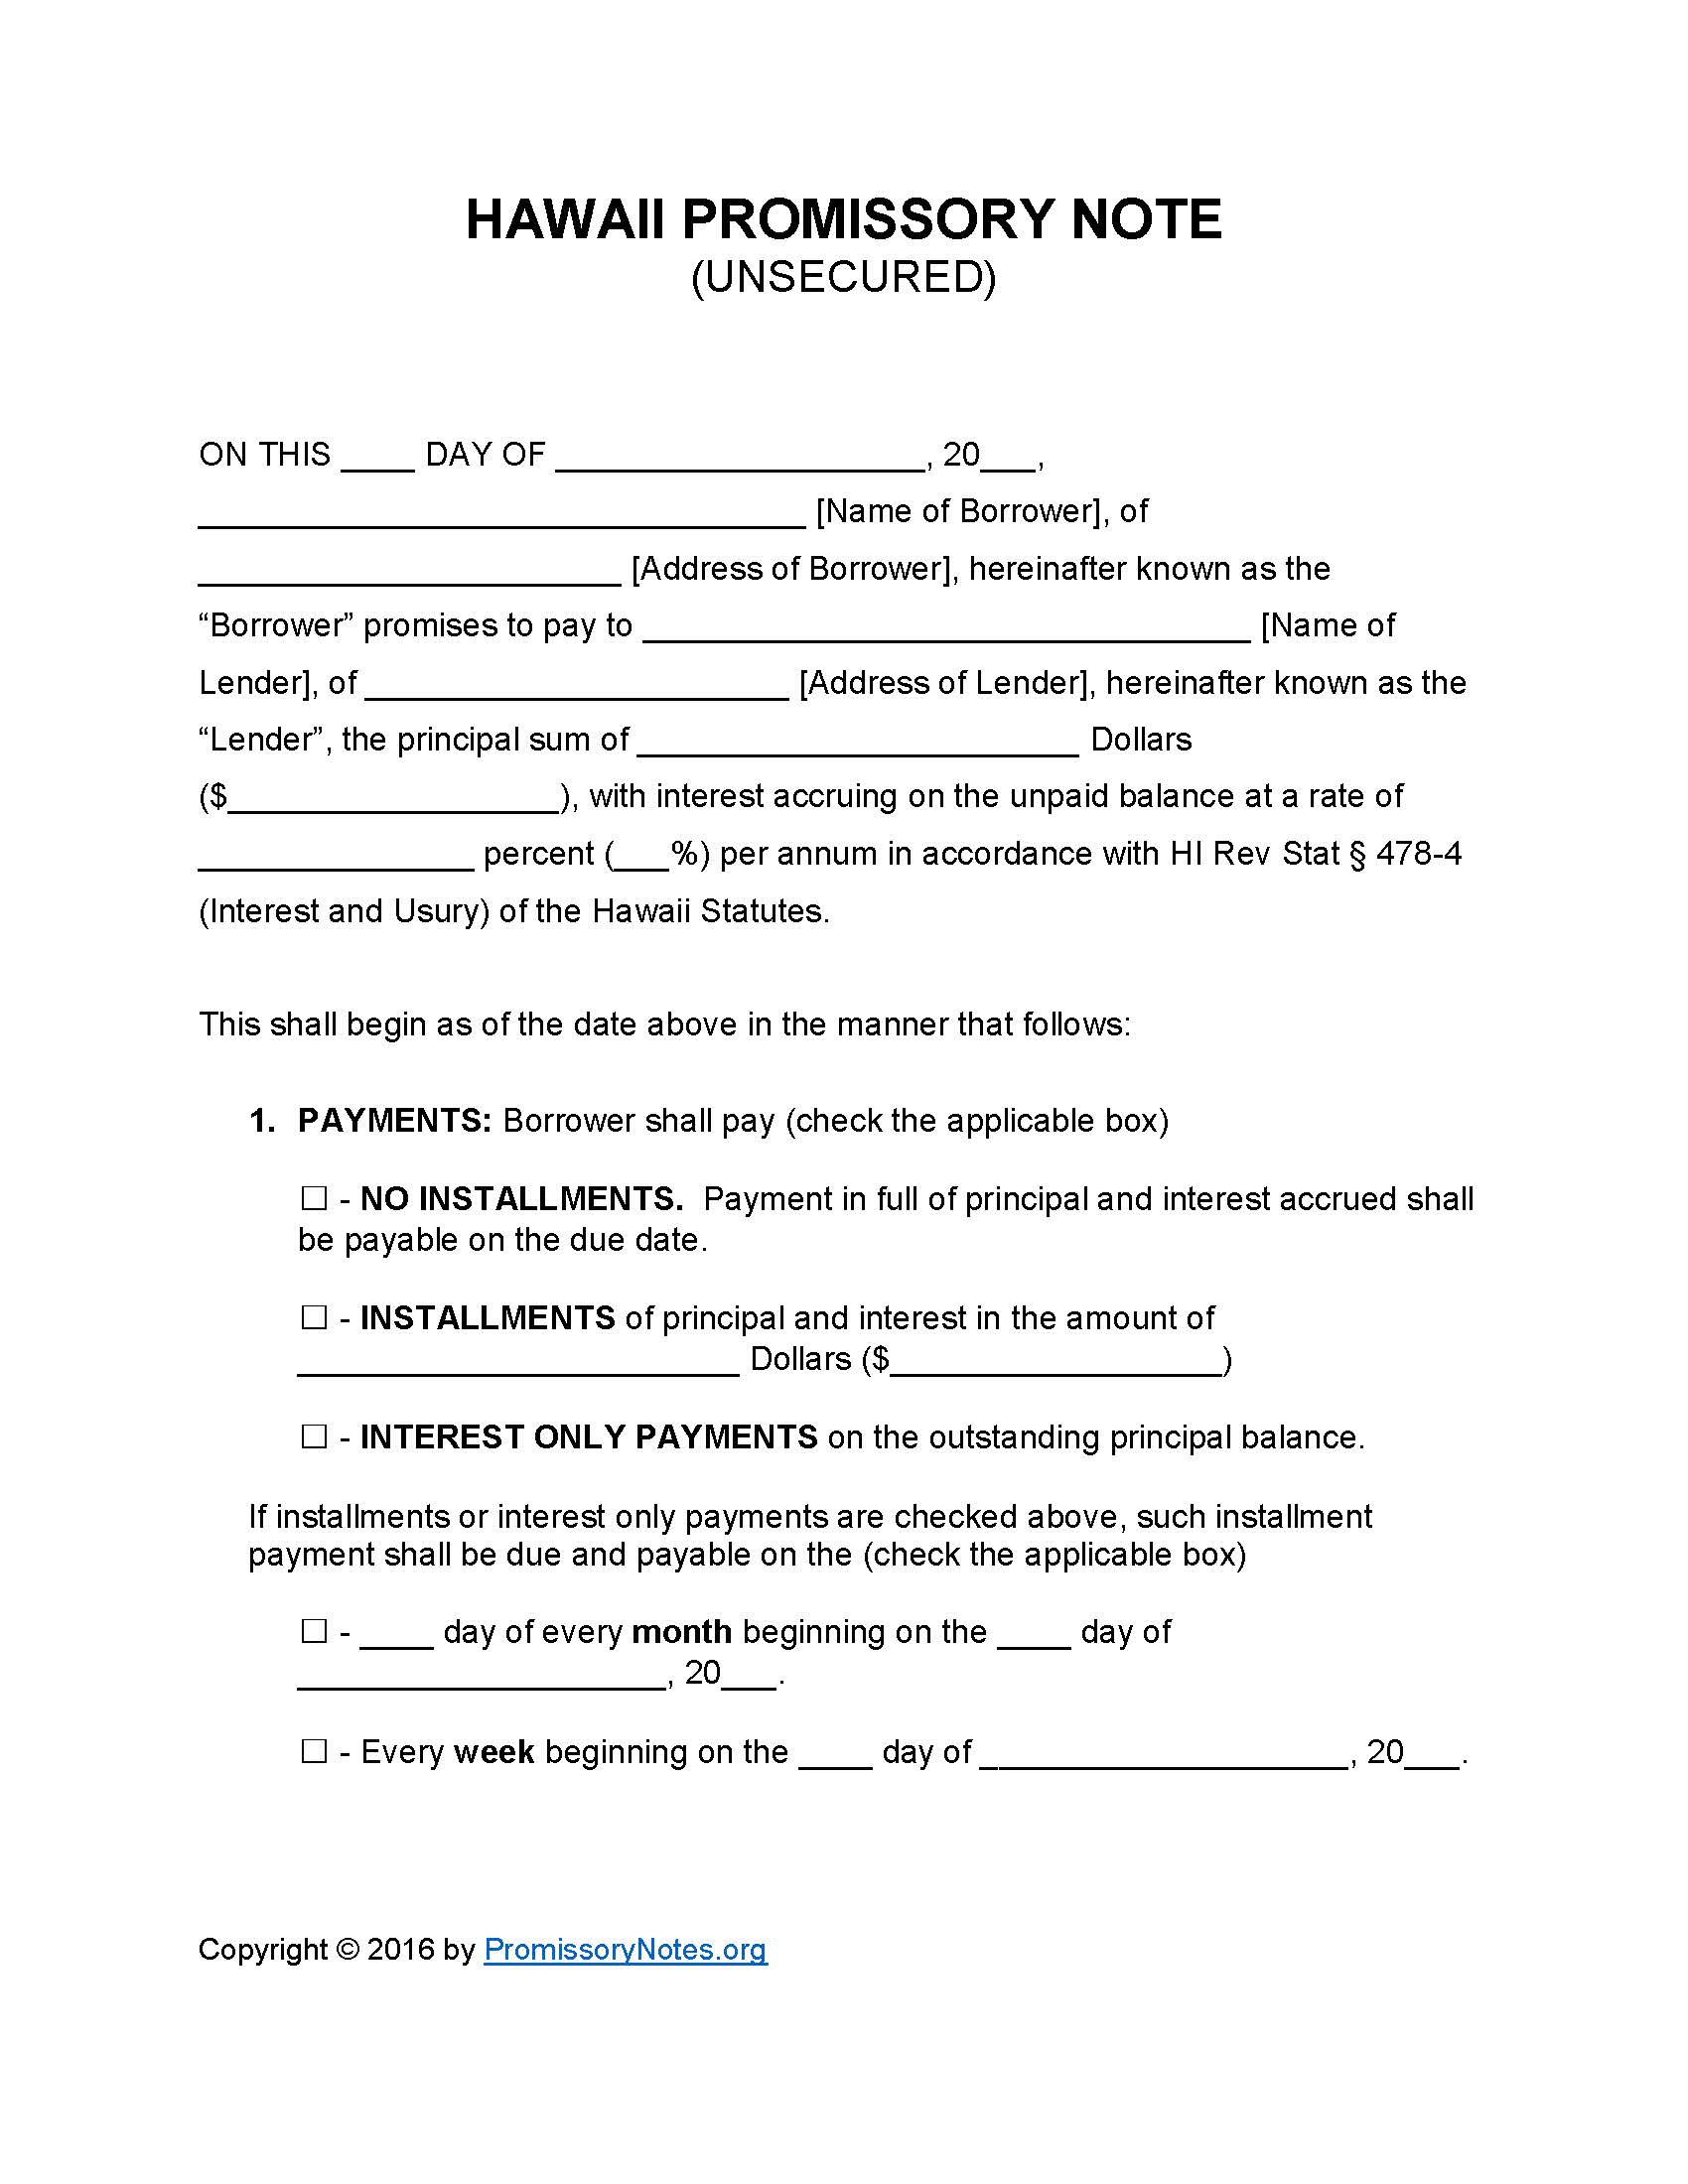 hawaii-unsecured-promissory-note-form